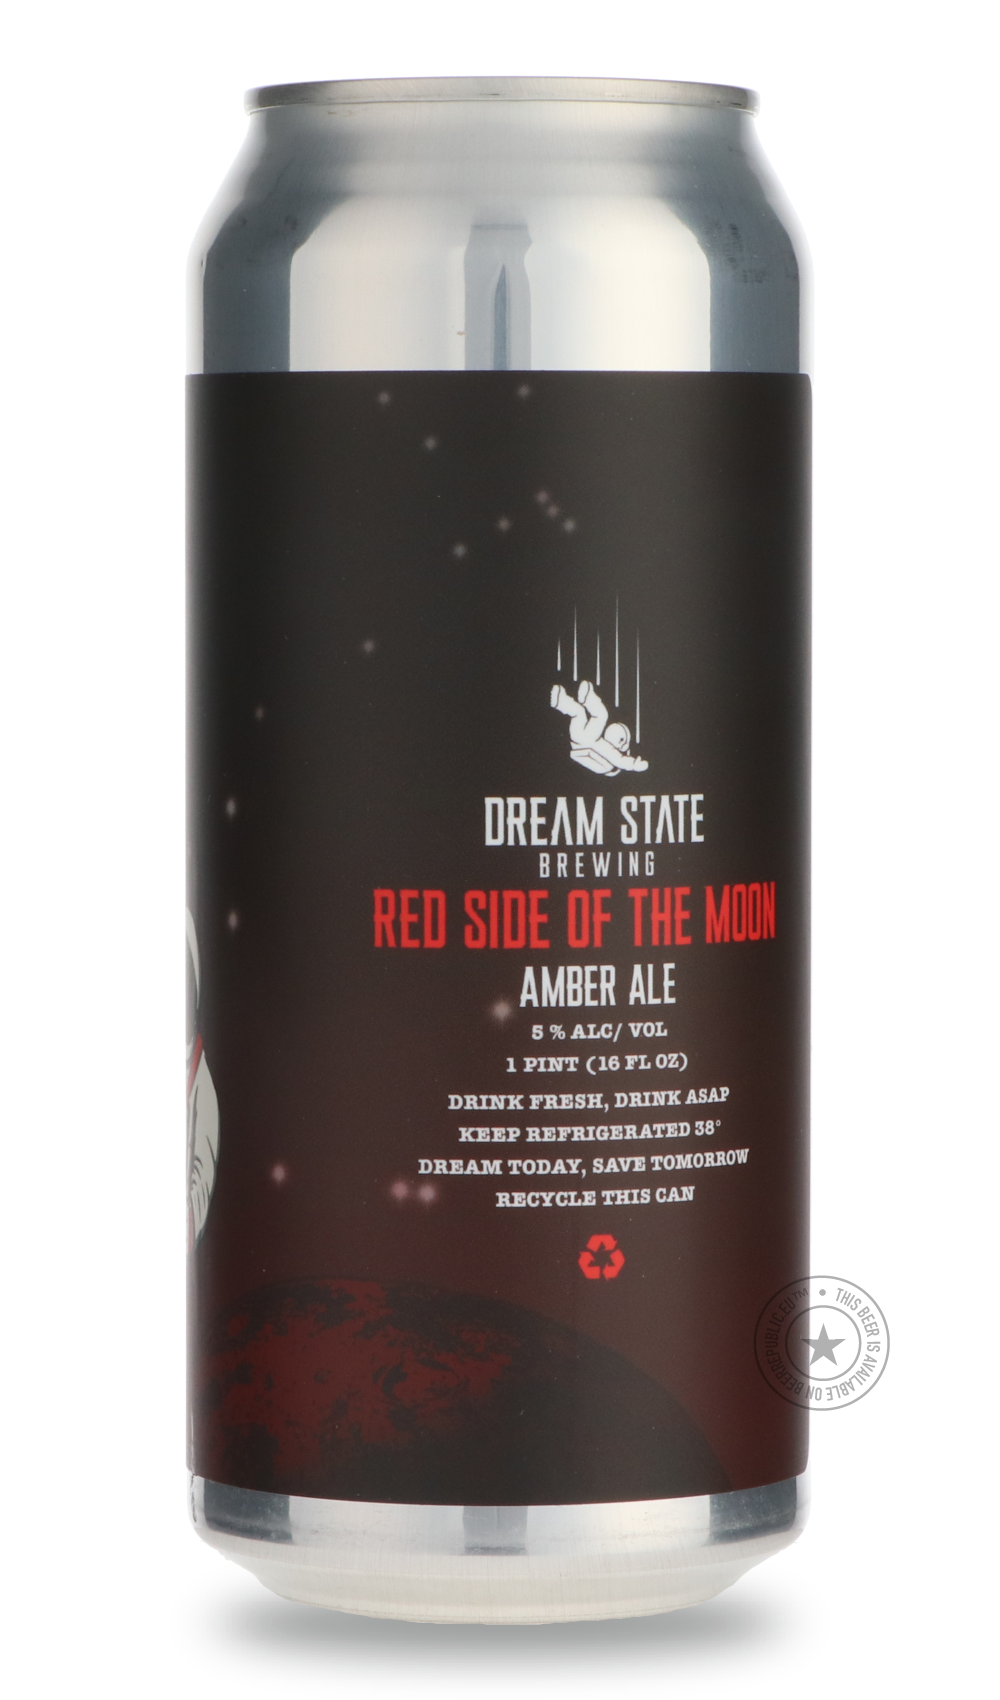 -Dream State- Red Side of the Moon-Brown & Dark- Only @ Beer Republic - The best online beer store for American & Canadian craft beer - Buy beer online from the USA and Canada - Bier online kopen - Amerikaans bier kopen - Craft beer store - Craft beer kopen - Amerikanisch bier kaufen - Bier online kaufen - Acheter biere online - IPA - Stout - Porter - New England IPA - Hazy IPA - Imperial Stout - Barrel Aged - Barrel Aged Imperial Stout - Brown - Dark beer - Blond - Blonde - Pilsner - Lager - Wheat - Weizen